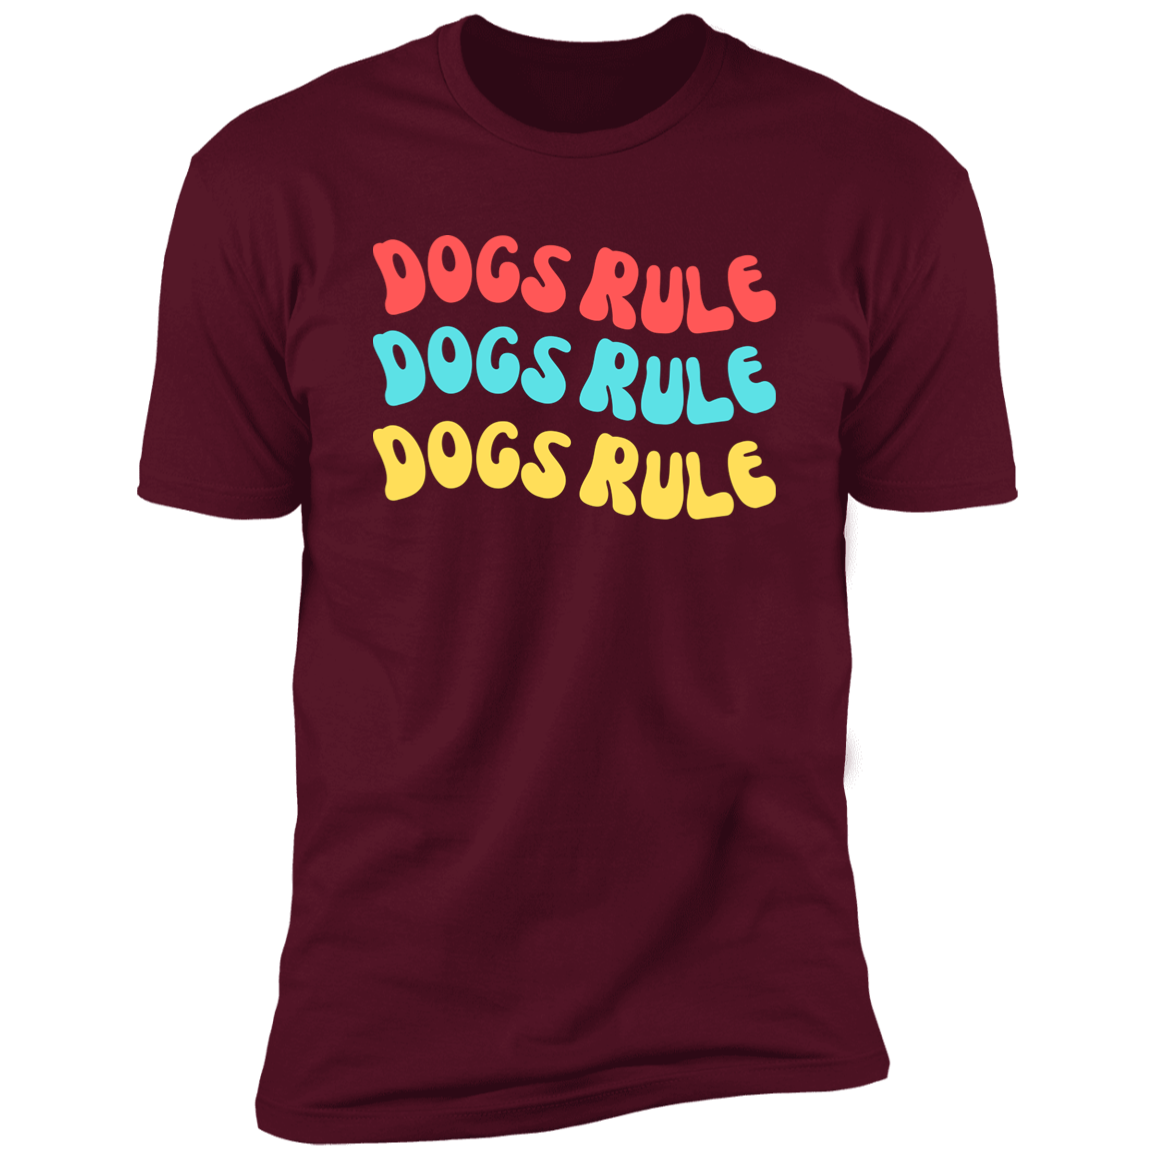 Dogs Rule Dog Shirt, dog shirt for humans, dog mom and dog dad shirt, in maroon